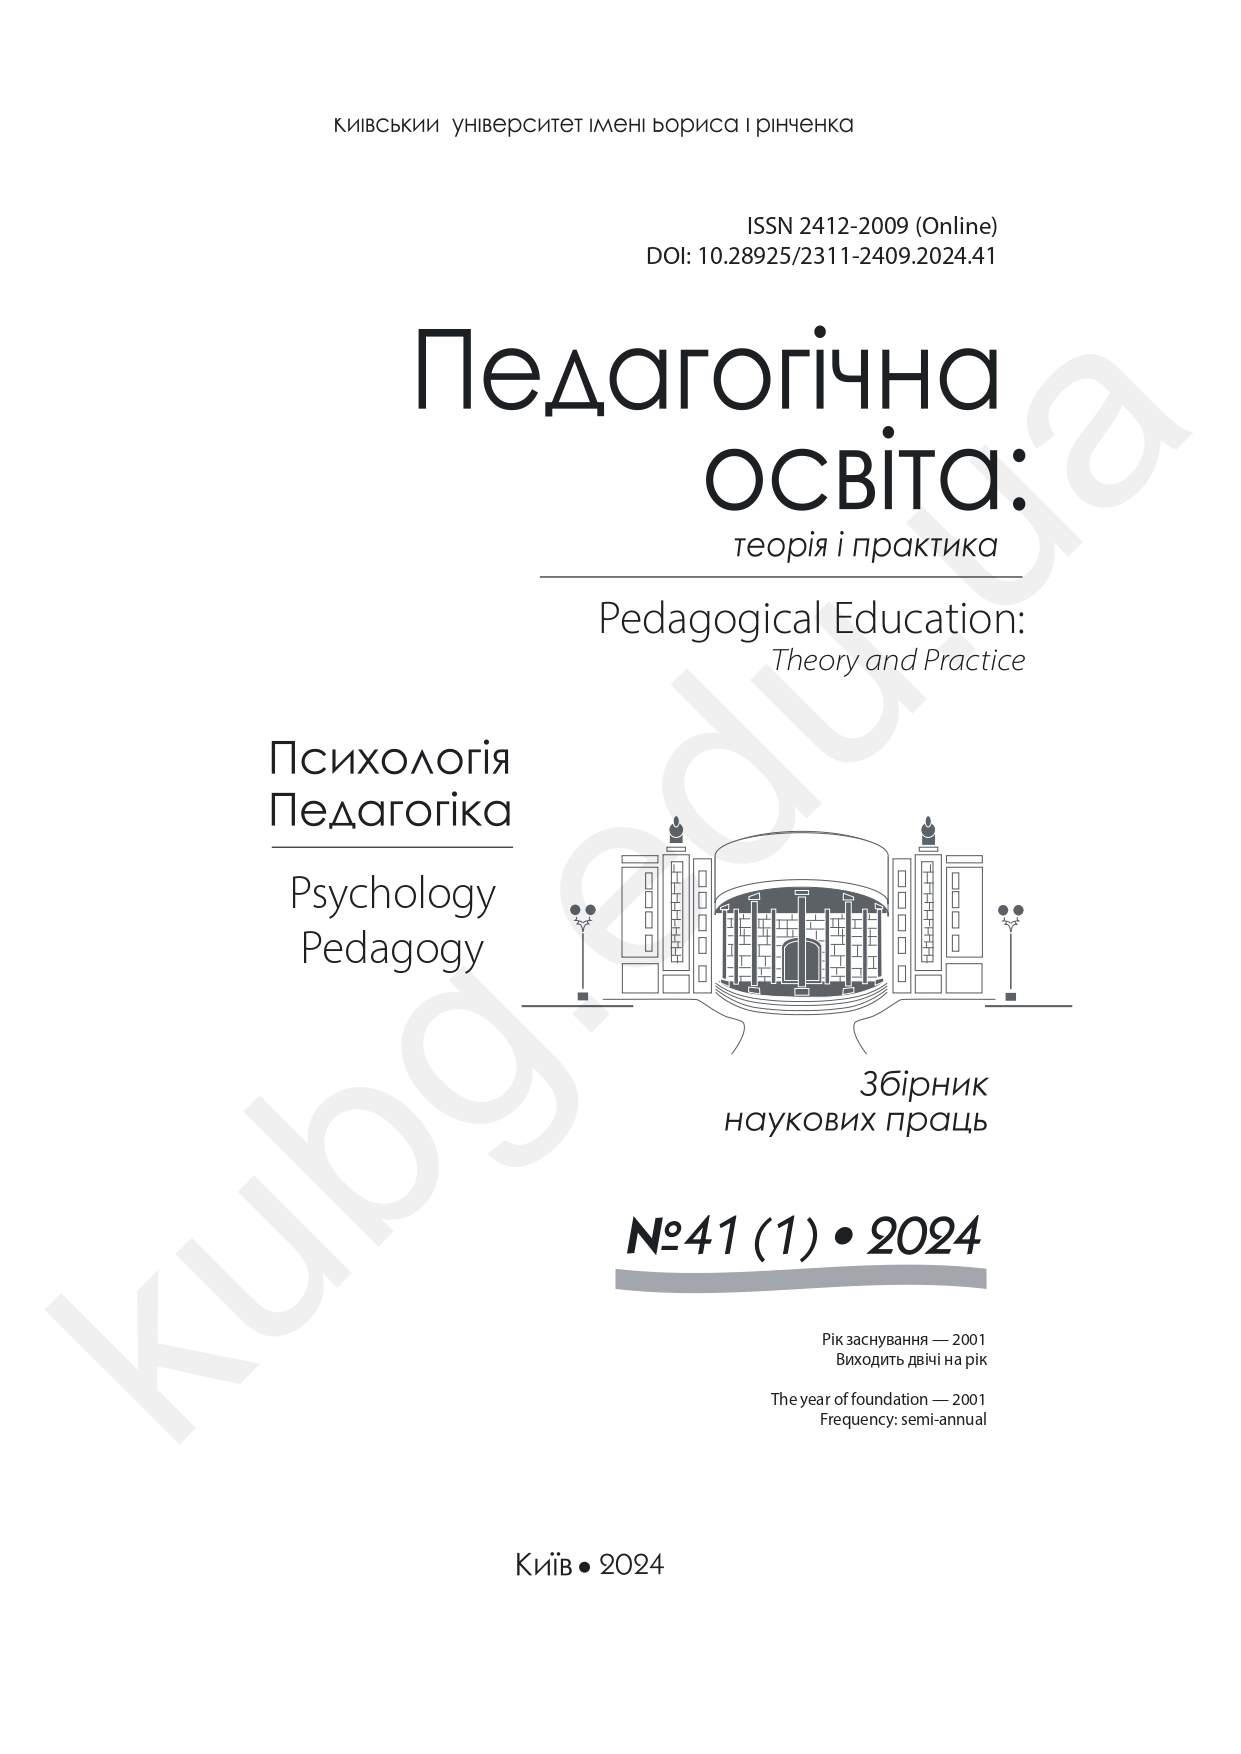 					View No. 41(1) (2024): Pedagogіcal education: Theory and Practice. Psychology. Pedagogy.
				